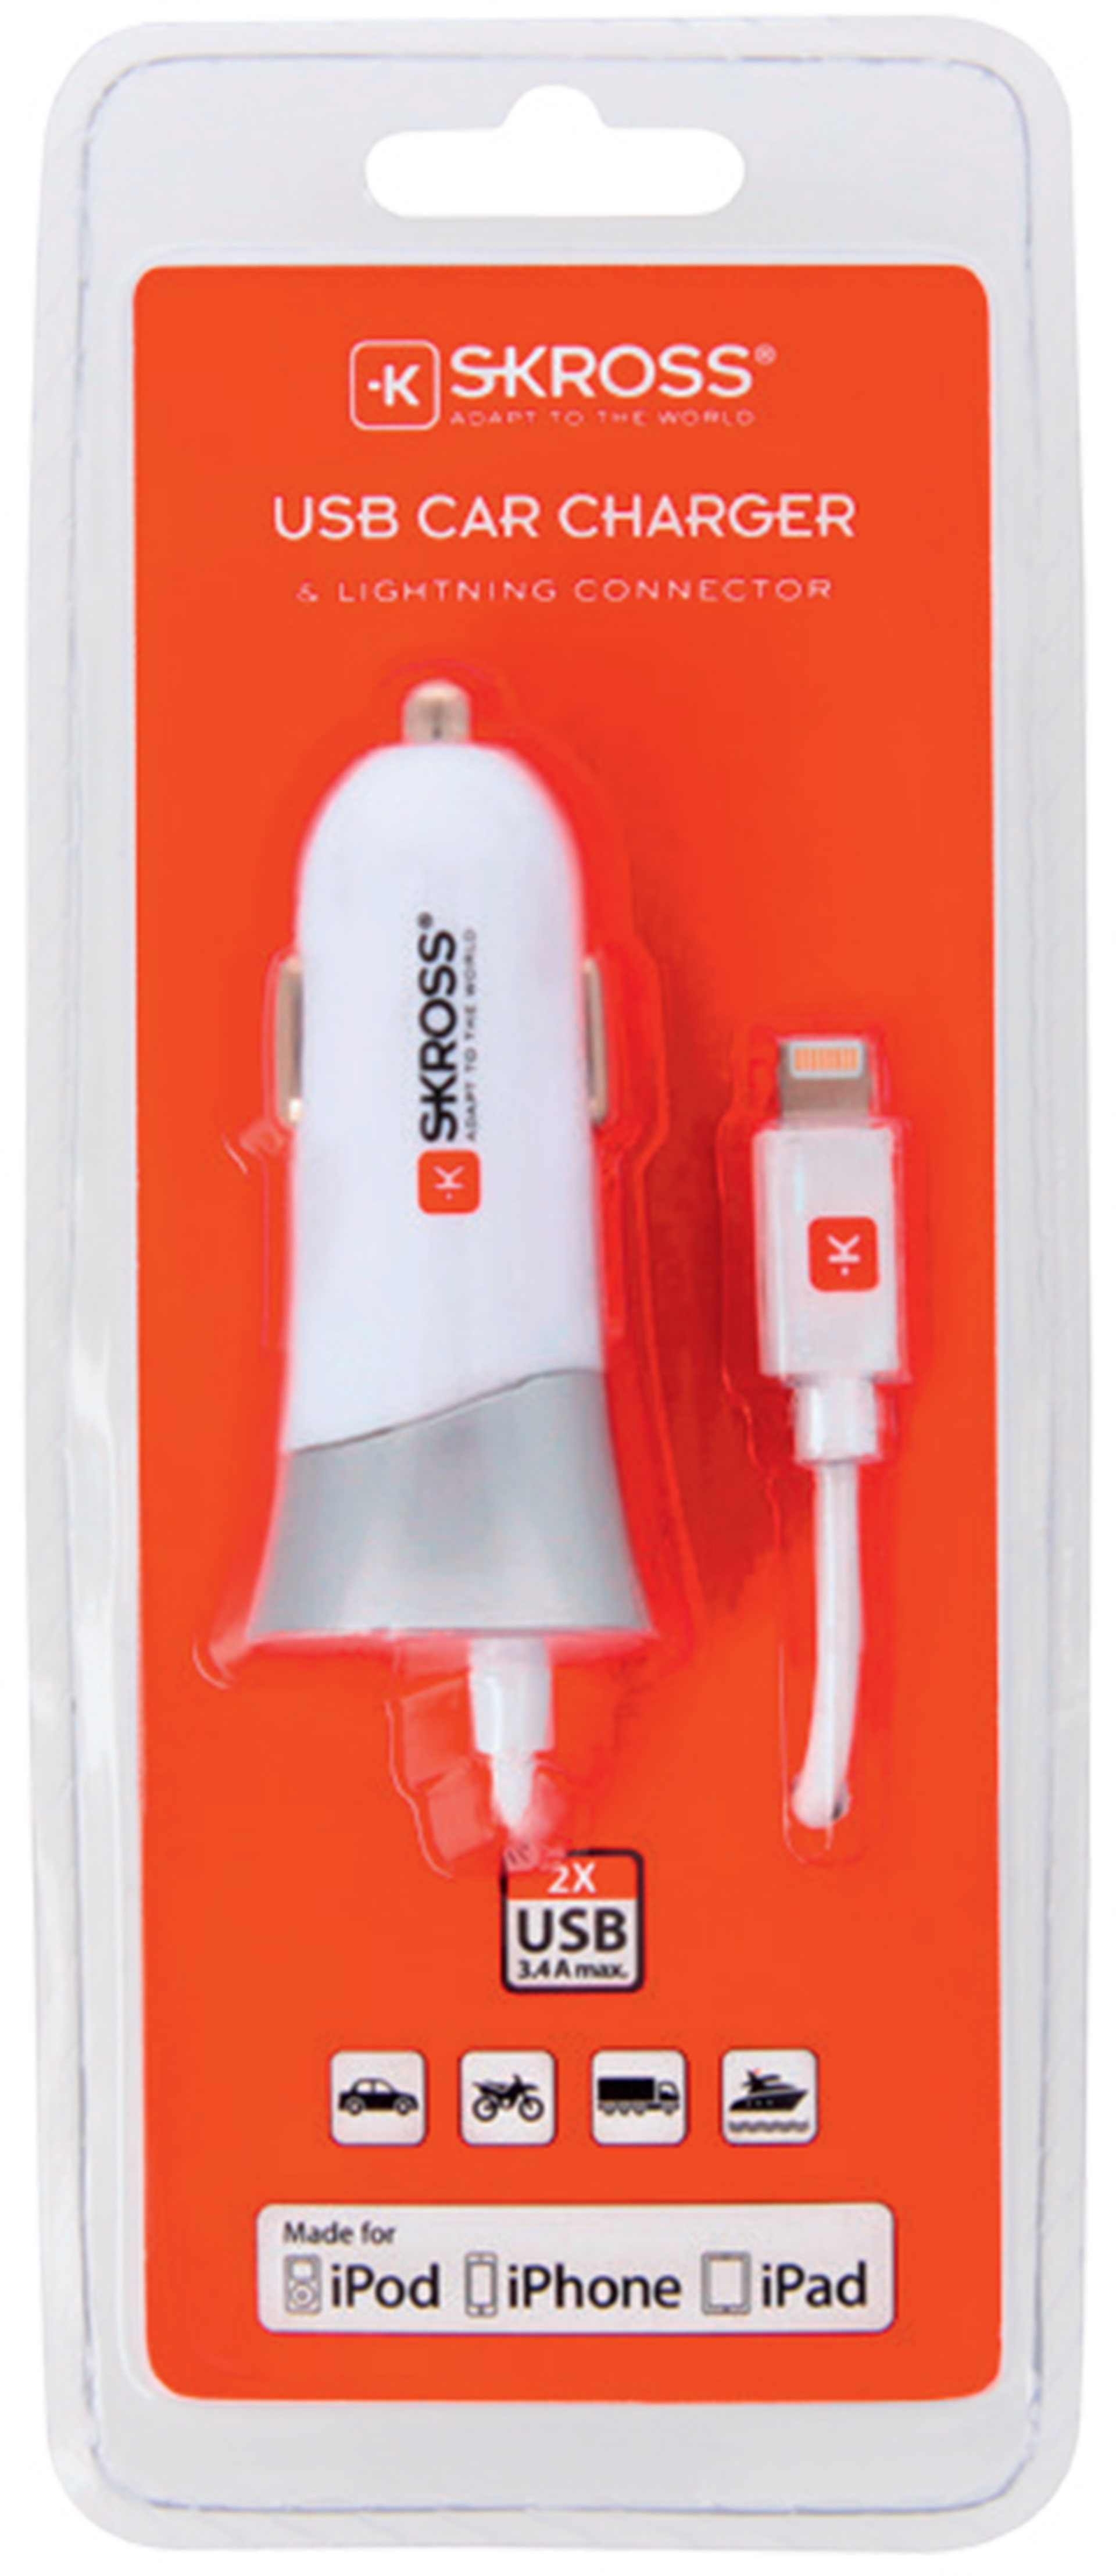 Skross Car USB Charger. USB Car Charger & Lightning Connector Packaging